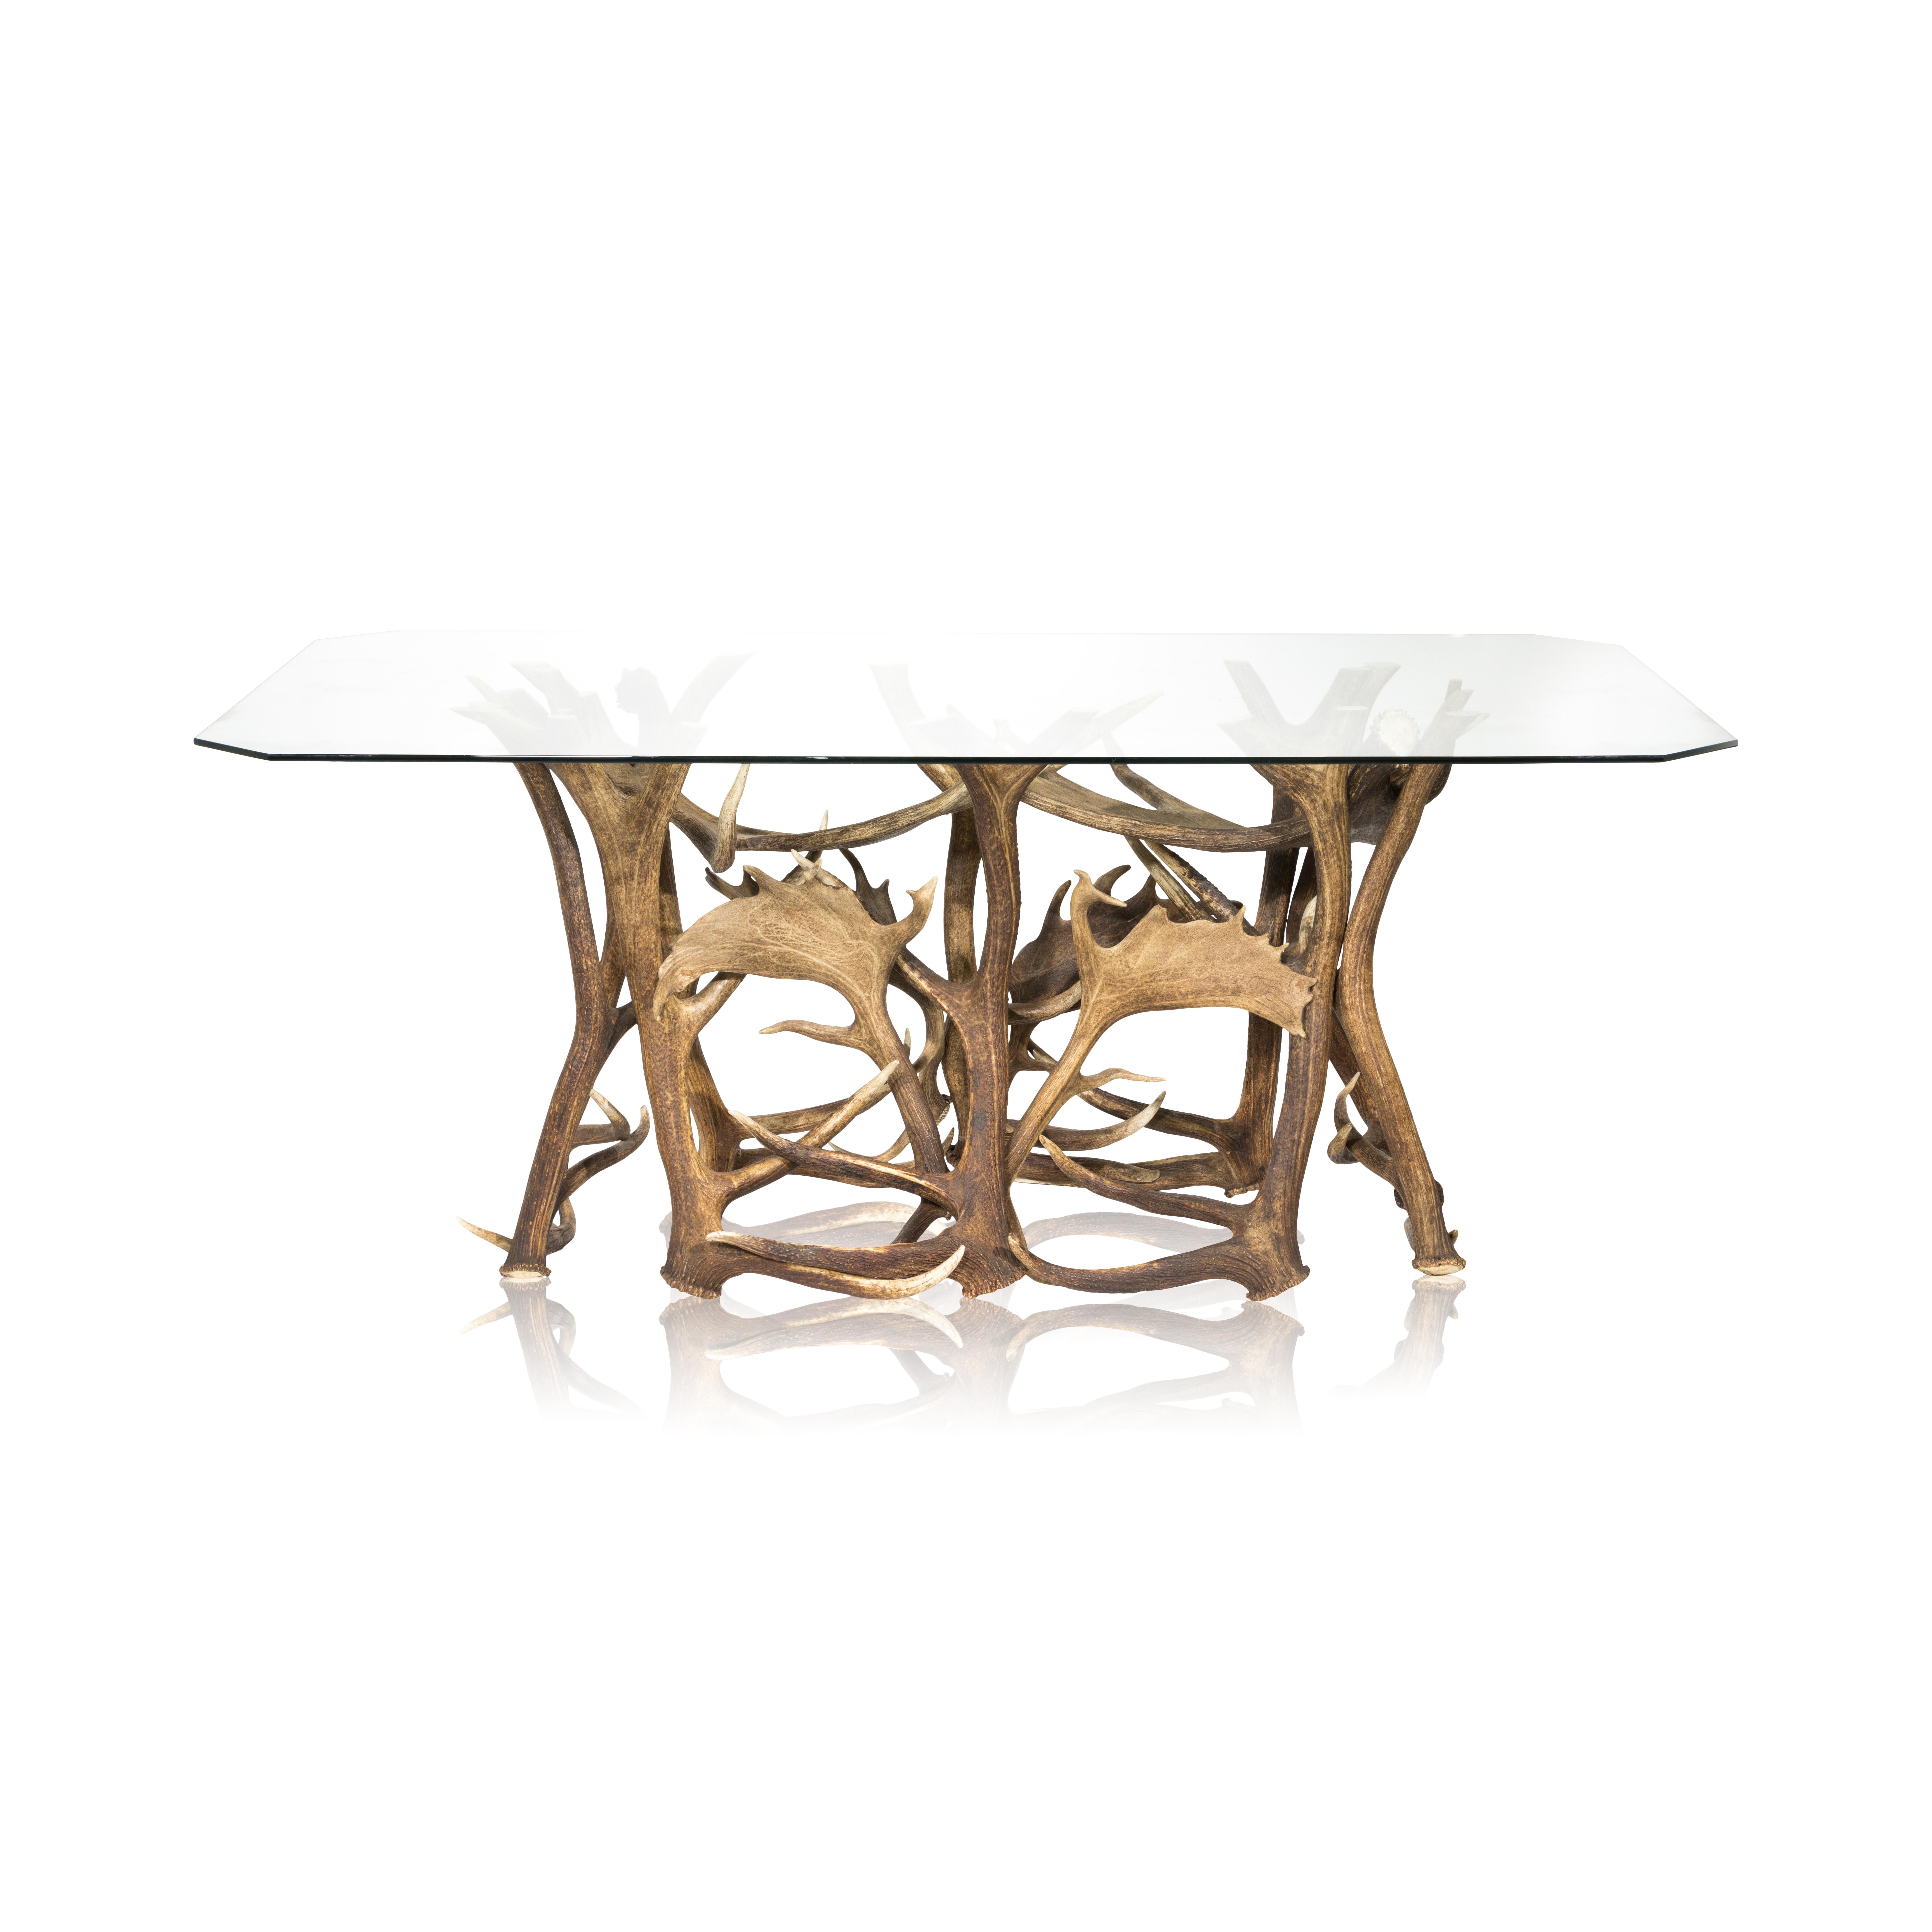 Antler Dining Room Table In Excellent Condition For Sale In Coeur d'Alene, ID